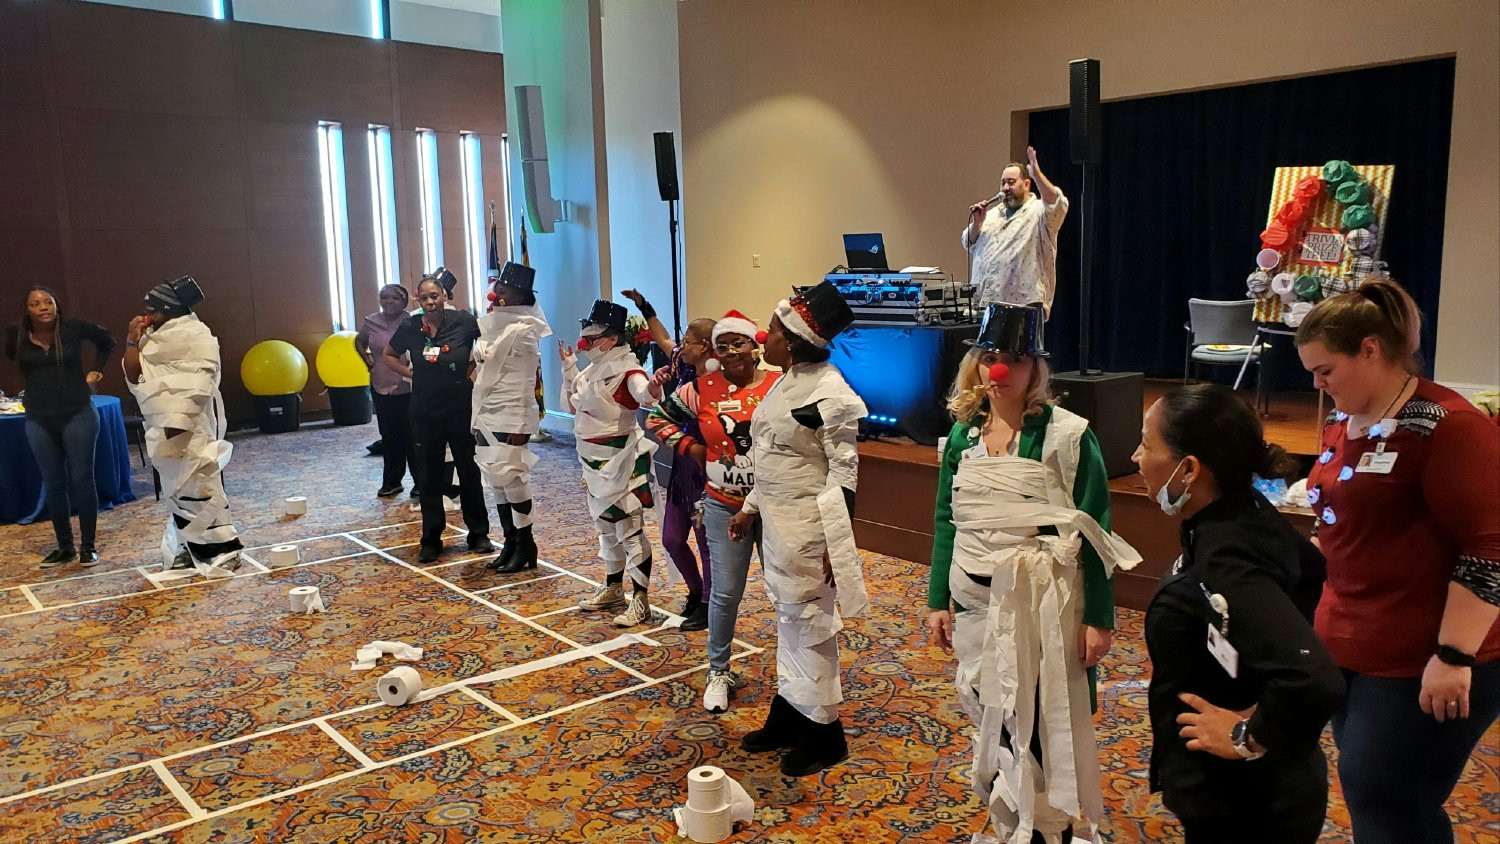 Holiday Party fun included a hilarious snowman contest.